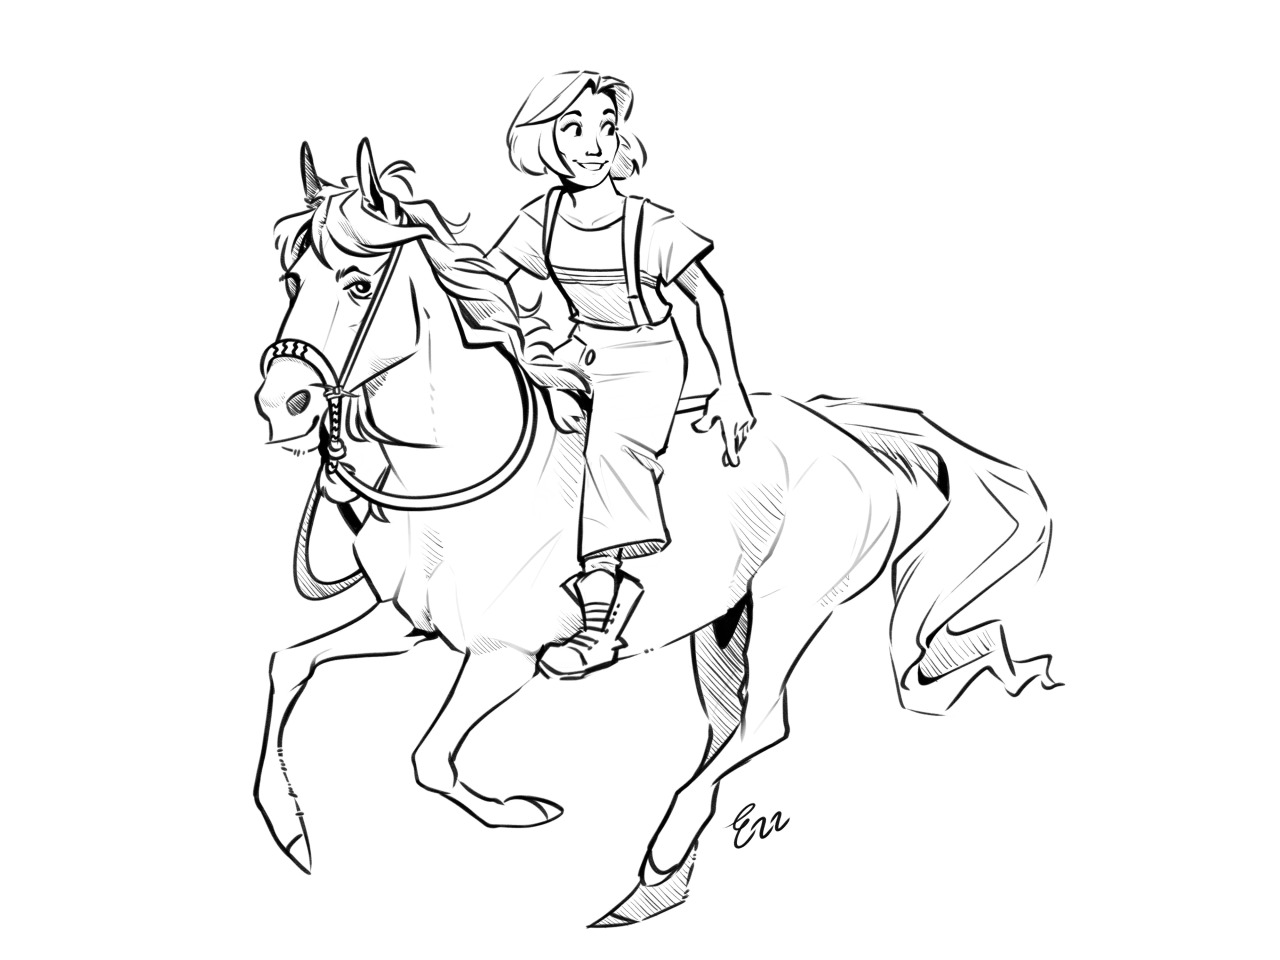 Started reading a horse girl au fic that gave Thirteen an adopted mustang which is objectively the best take I’ve ever encountered (theres a heart on my sleeve (youll take it when you leave) by sapphicsgalaxy) #thirteenth doctor#doctor who #thirteenth doctor fanart #thasmin#horse au #fanart of a fanfic  #also I apologize for wonky proportions Im in a bit of a learning phase  #color machine broke try again later #sketches#my art